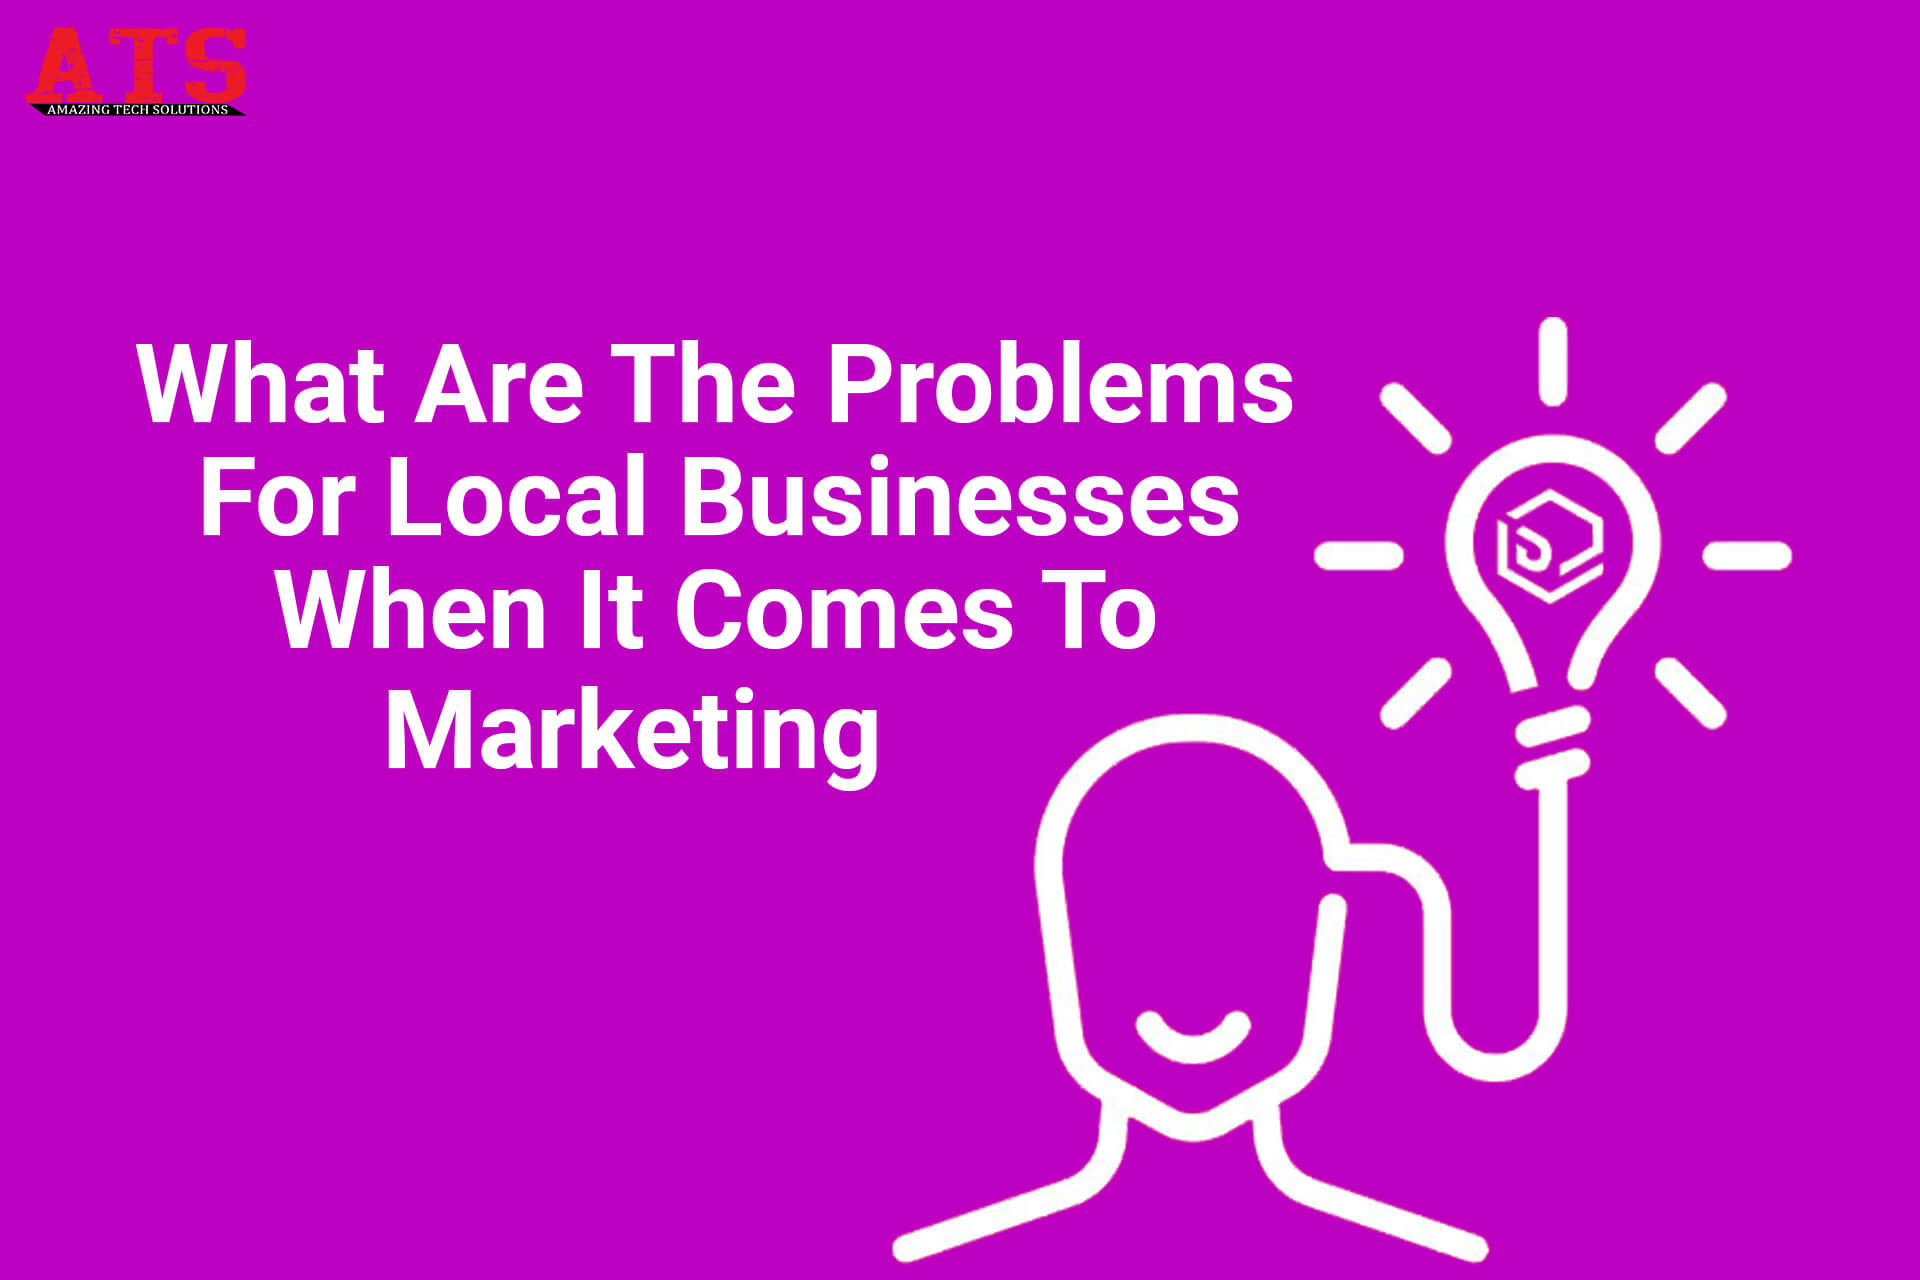 What Are The Problems For Local Businesses When It Comes To Marketing